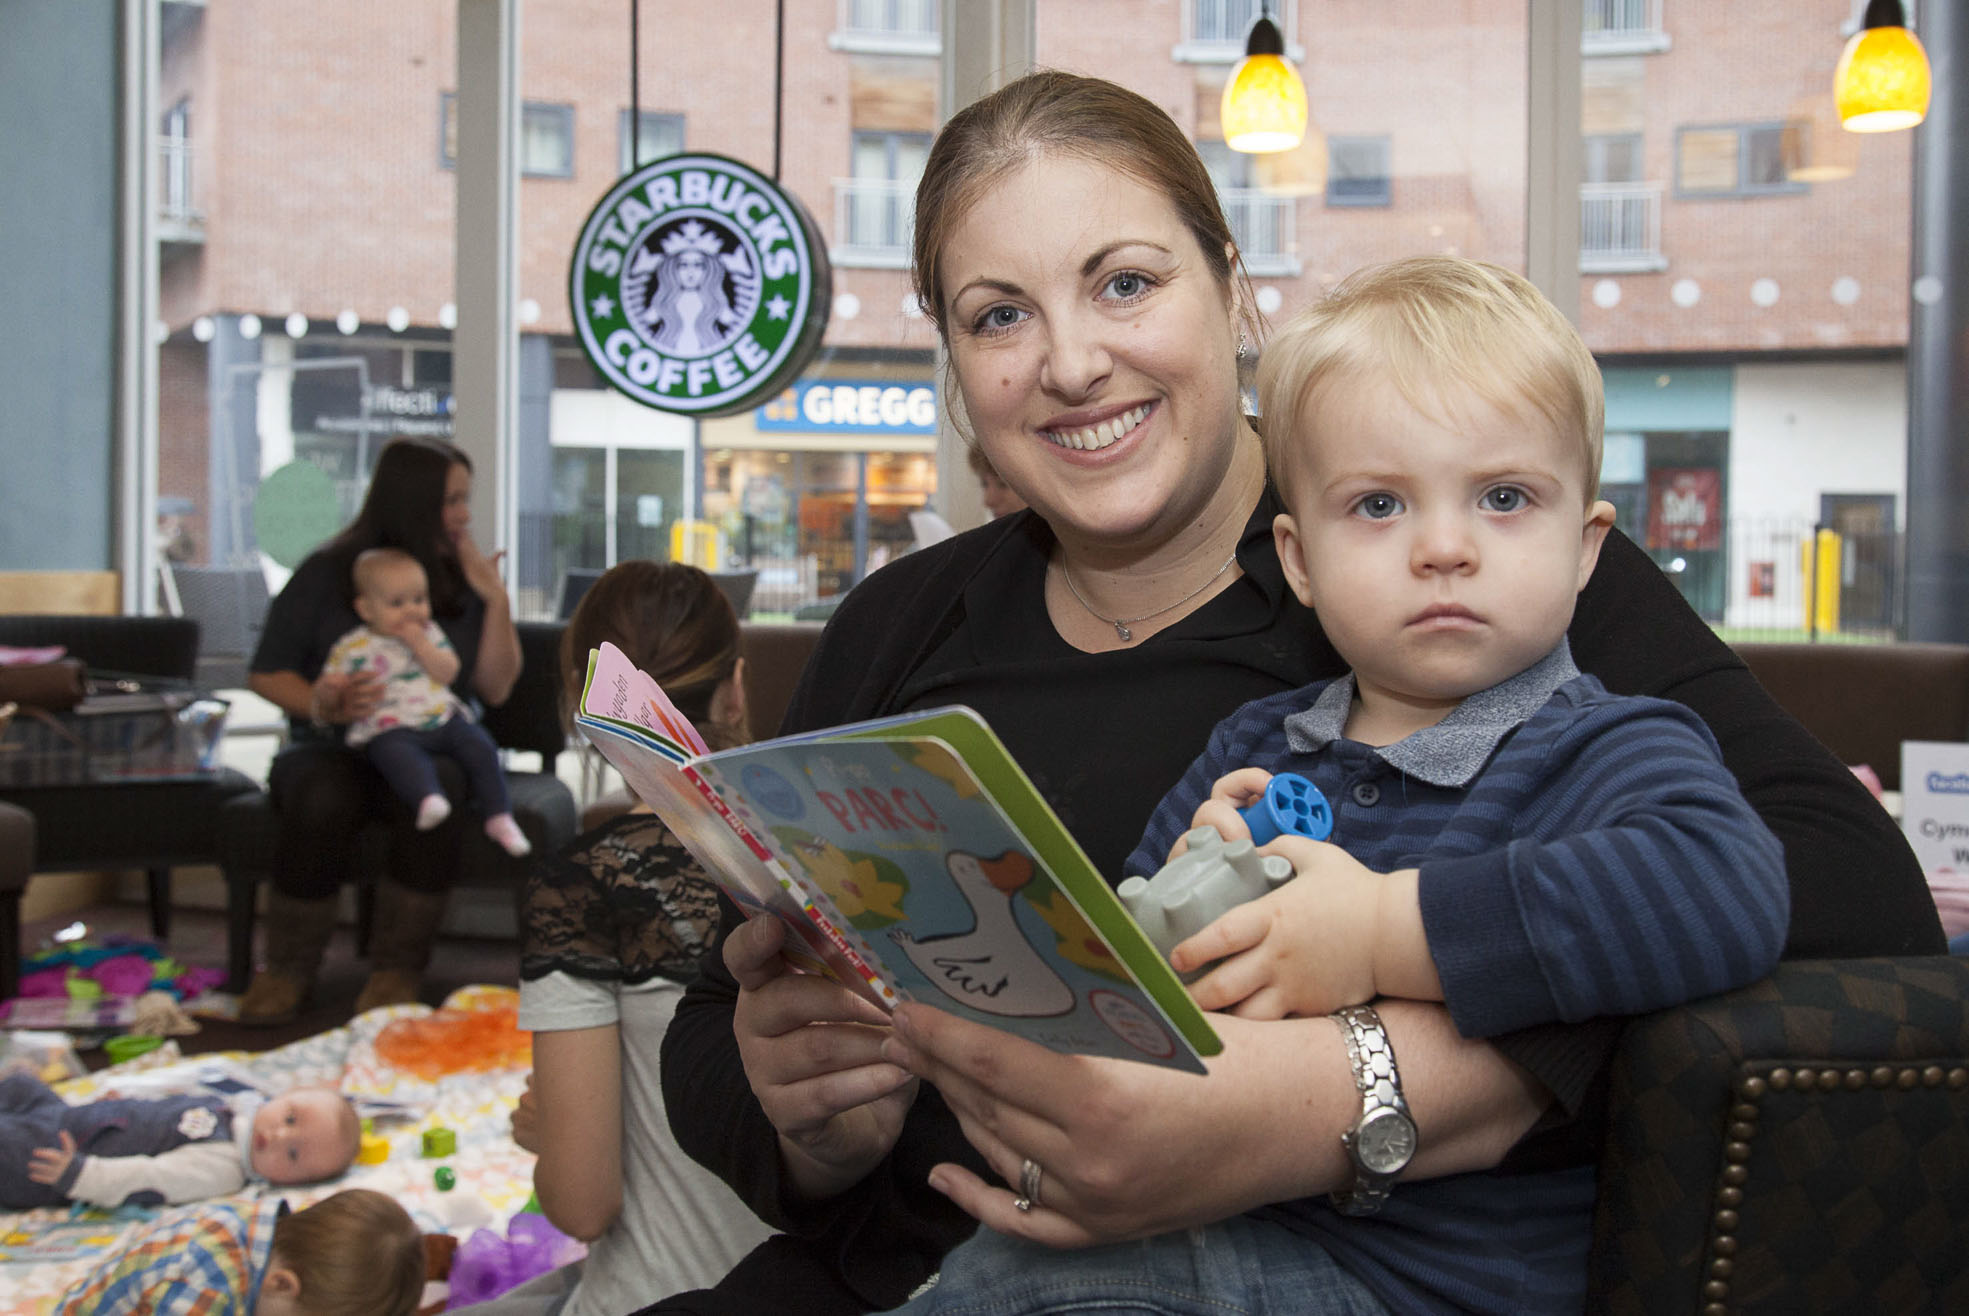 Coffee shop helps tots to mind their Welsh language in weekly story sessions